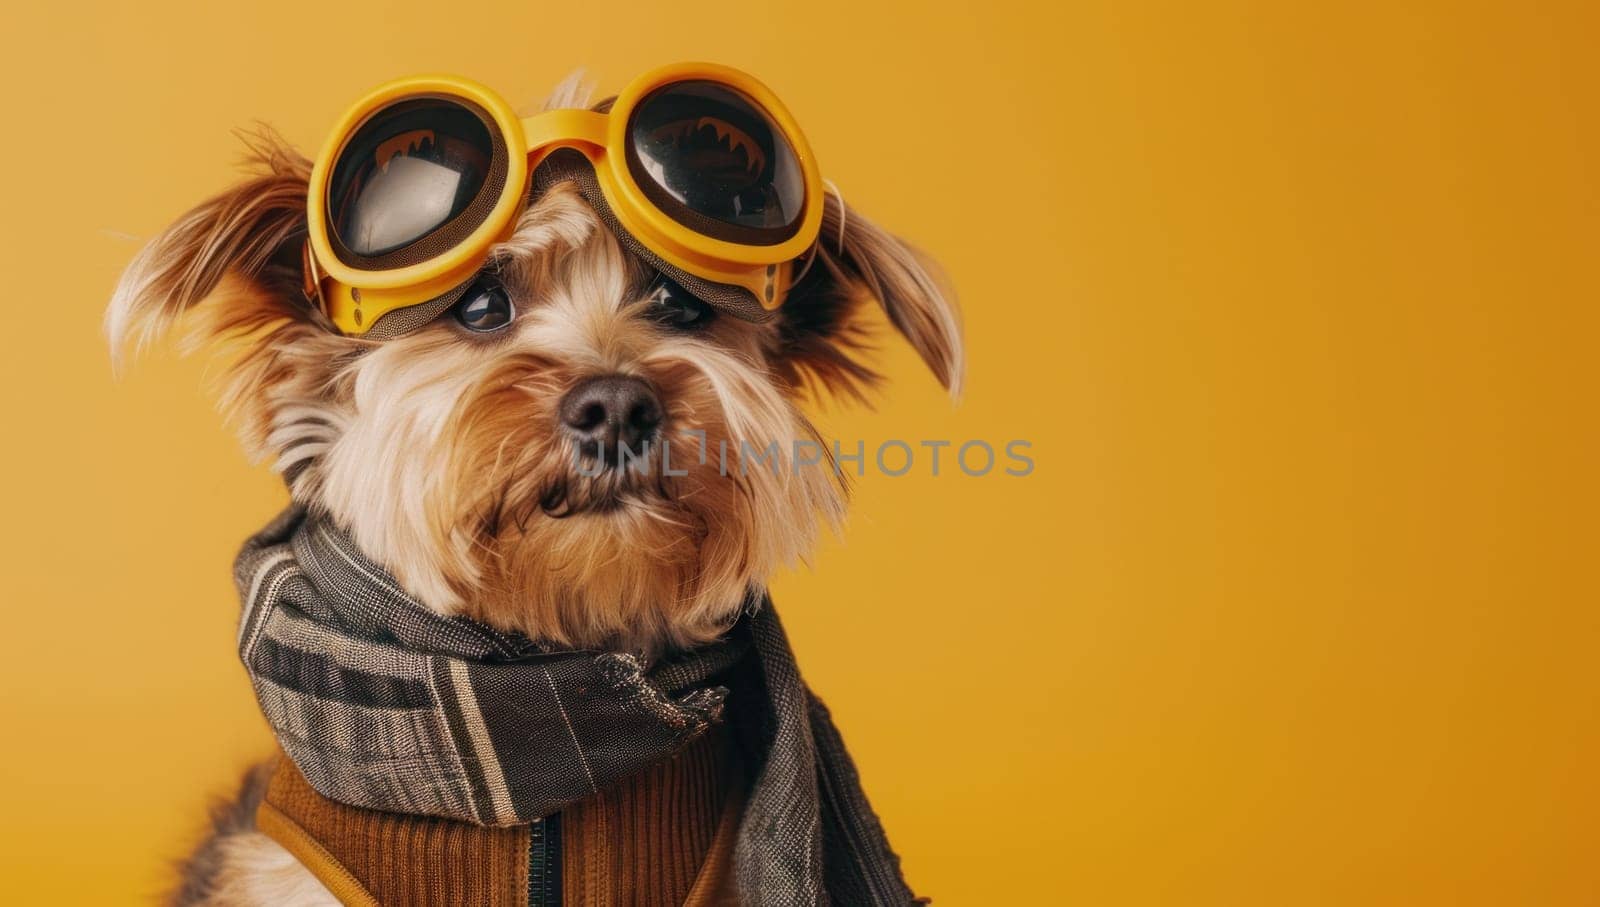 Yorkshire terrier dog wearing goggles on yellow background adventure ready canine companion for stylish travelers